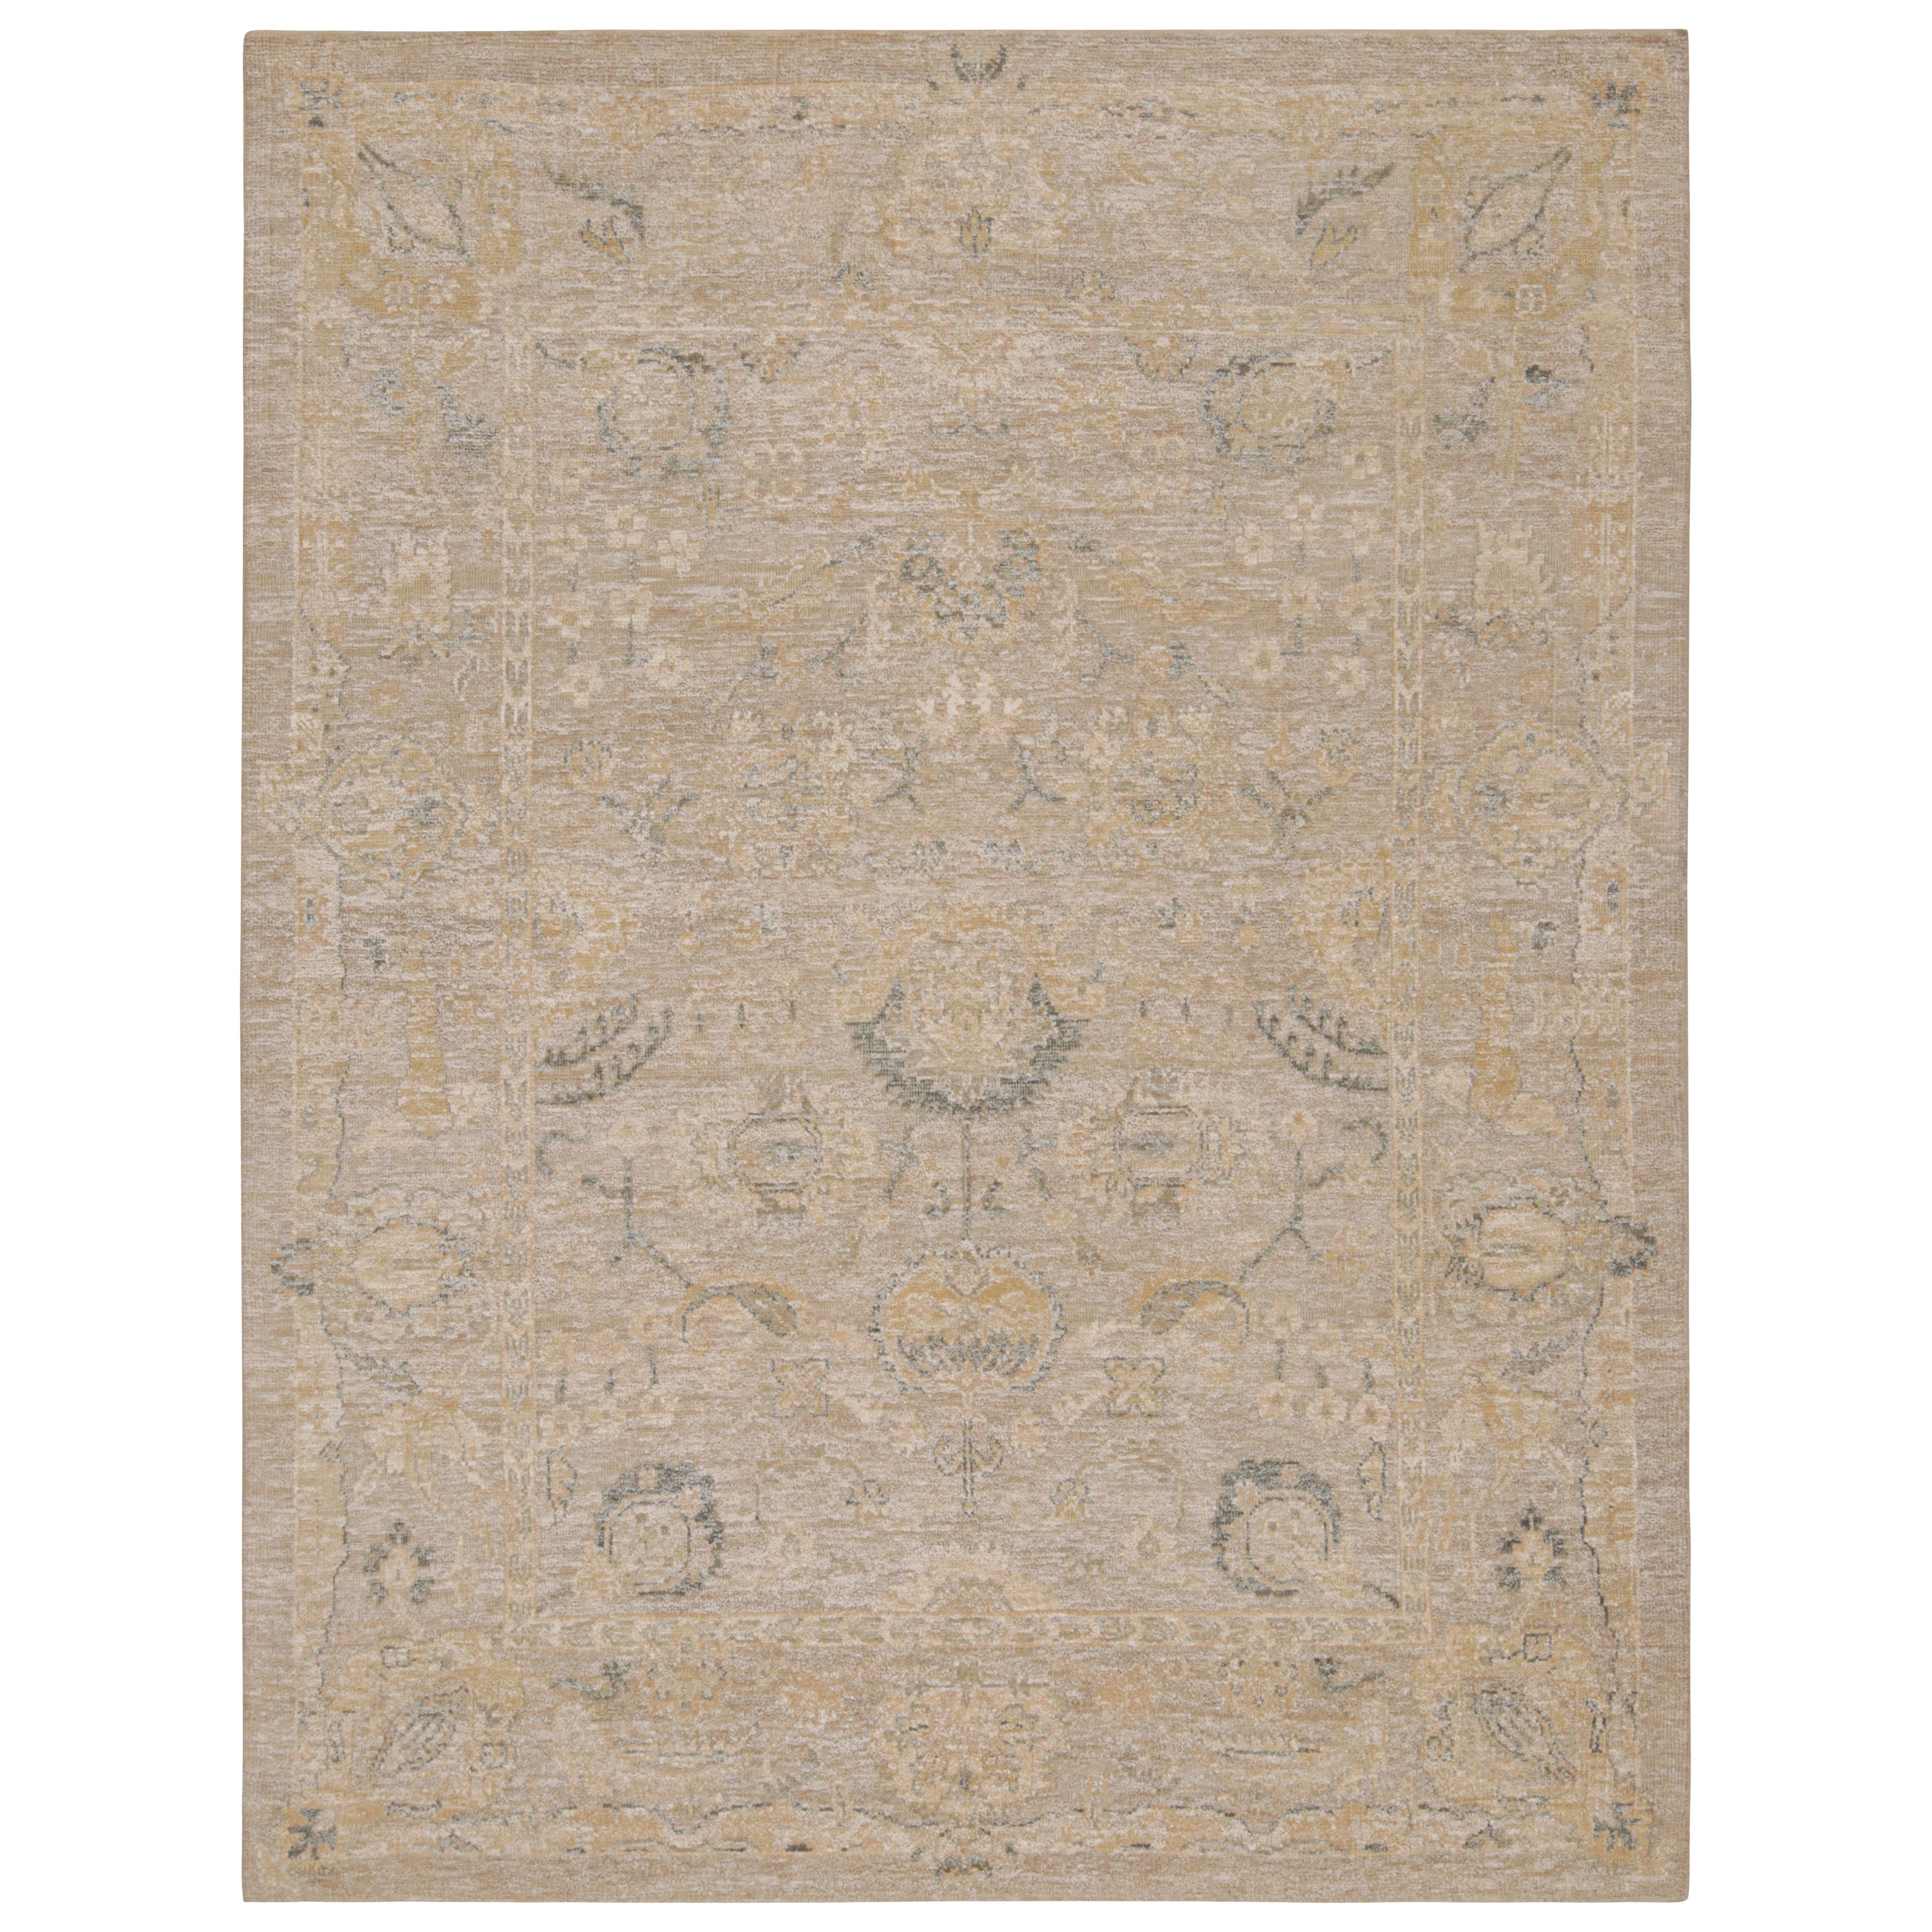 Rug & Kilim’s Oushak Style Rug In Beige-Brown and Gray with Floral Patterns